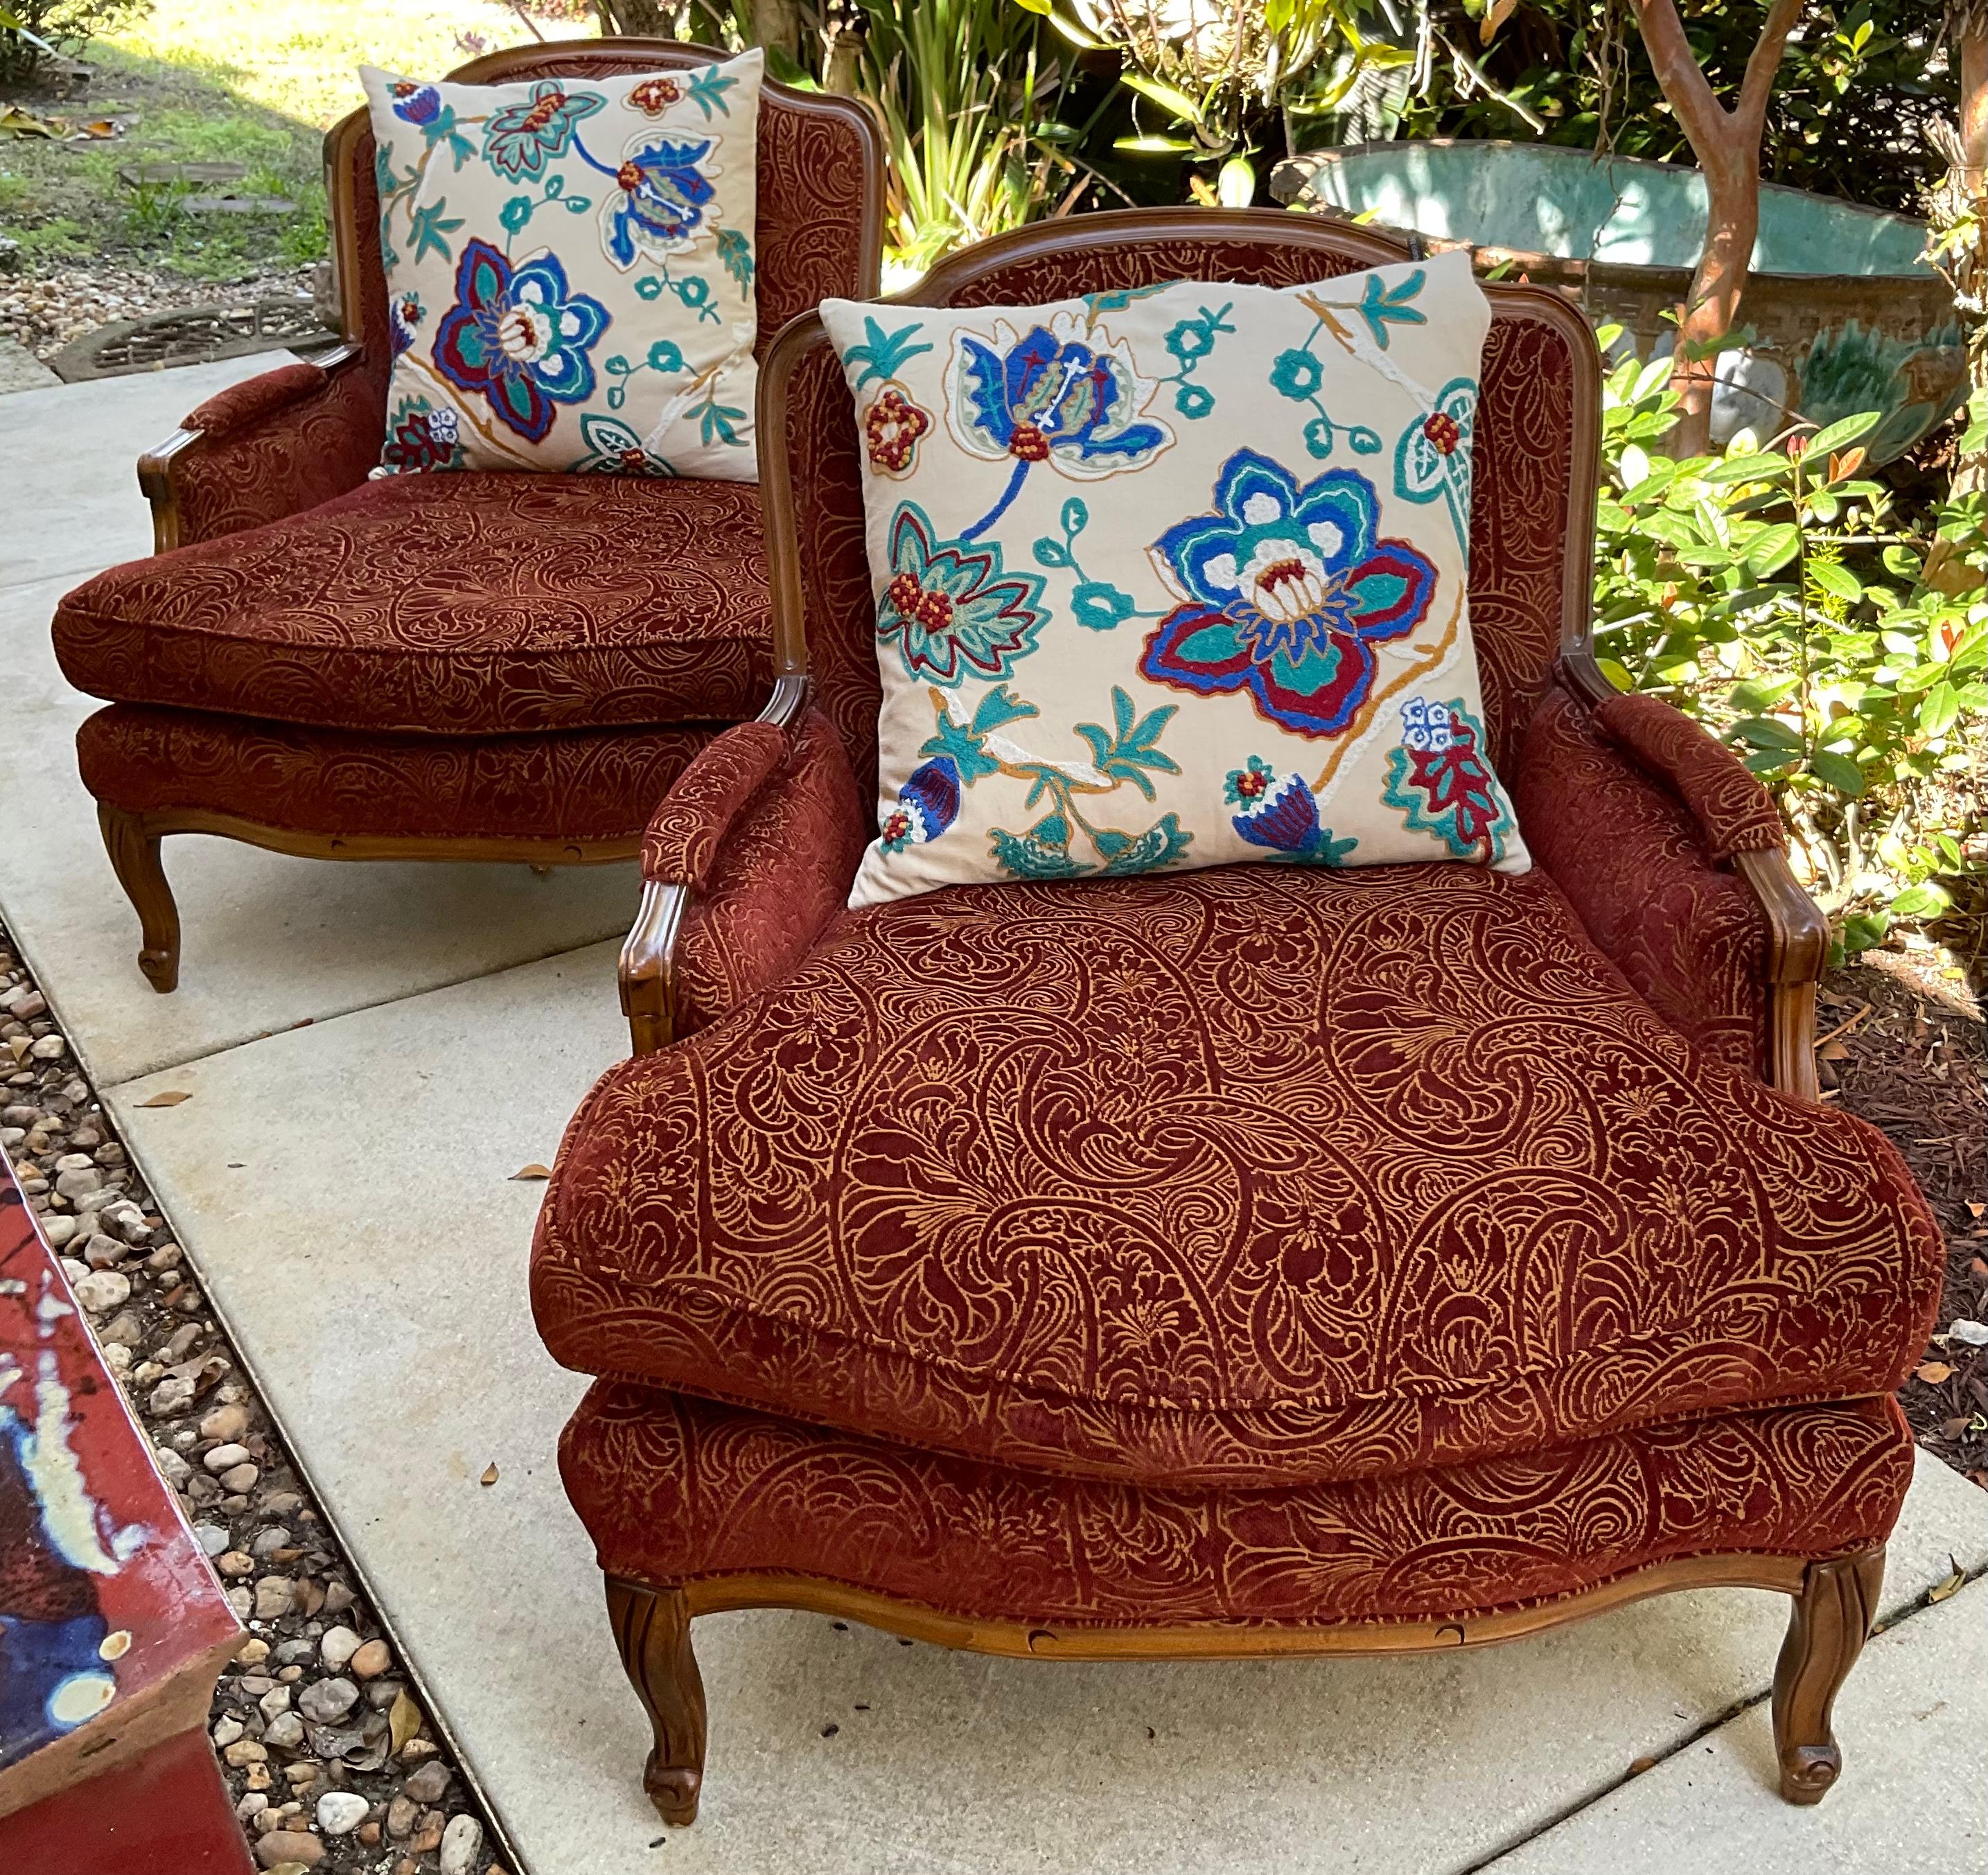 Pair of quality vintage wood hand carved armchairs, French style, deep, oversized seats, upholstered damask patterned fabric.
Two quality large suzani pillows included.